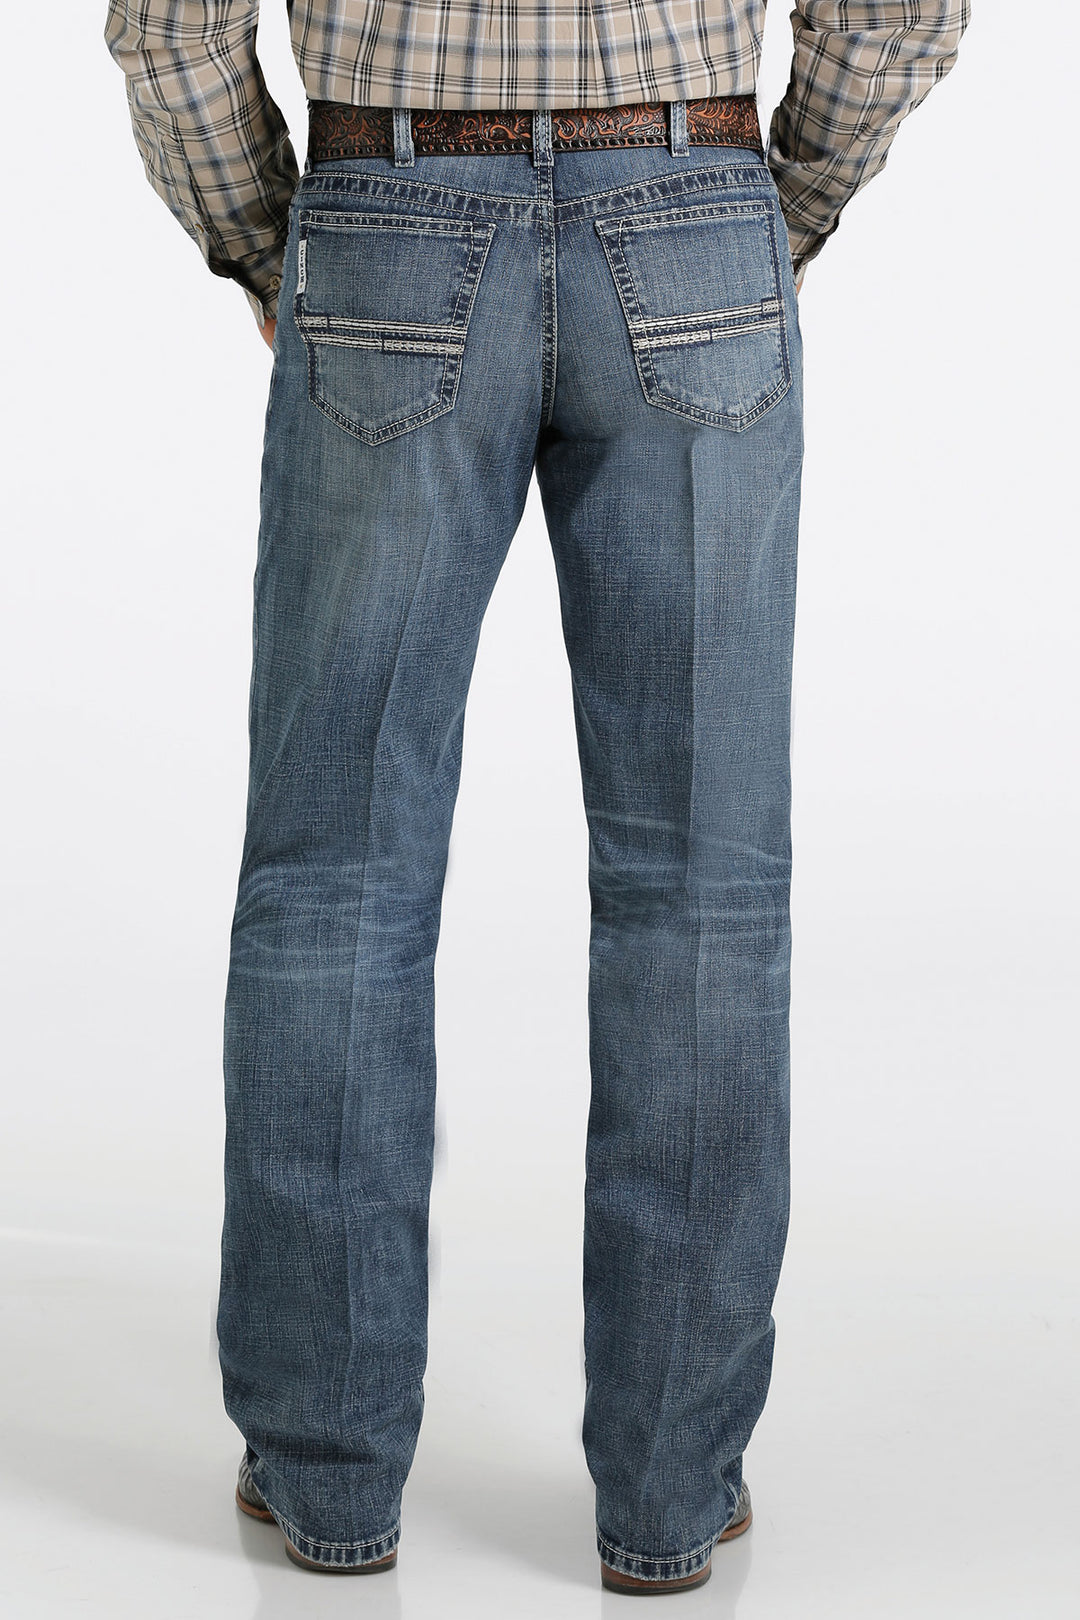 Back view Cinch | White Label Relaxed Med Stonewash Performance Jean